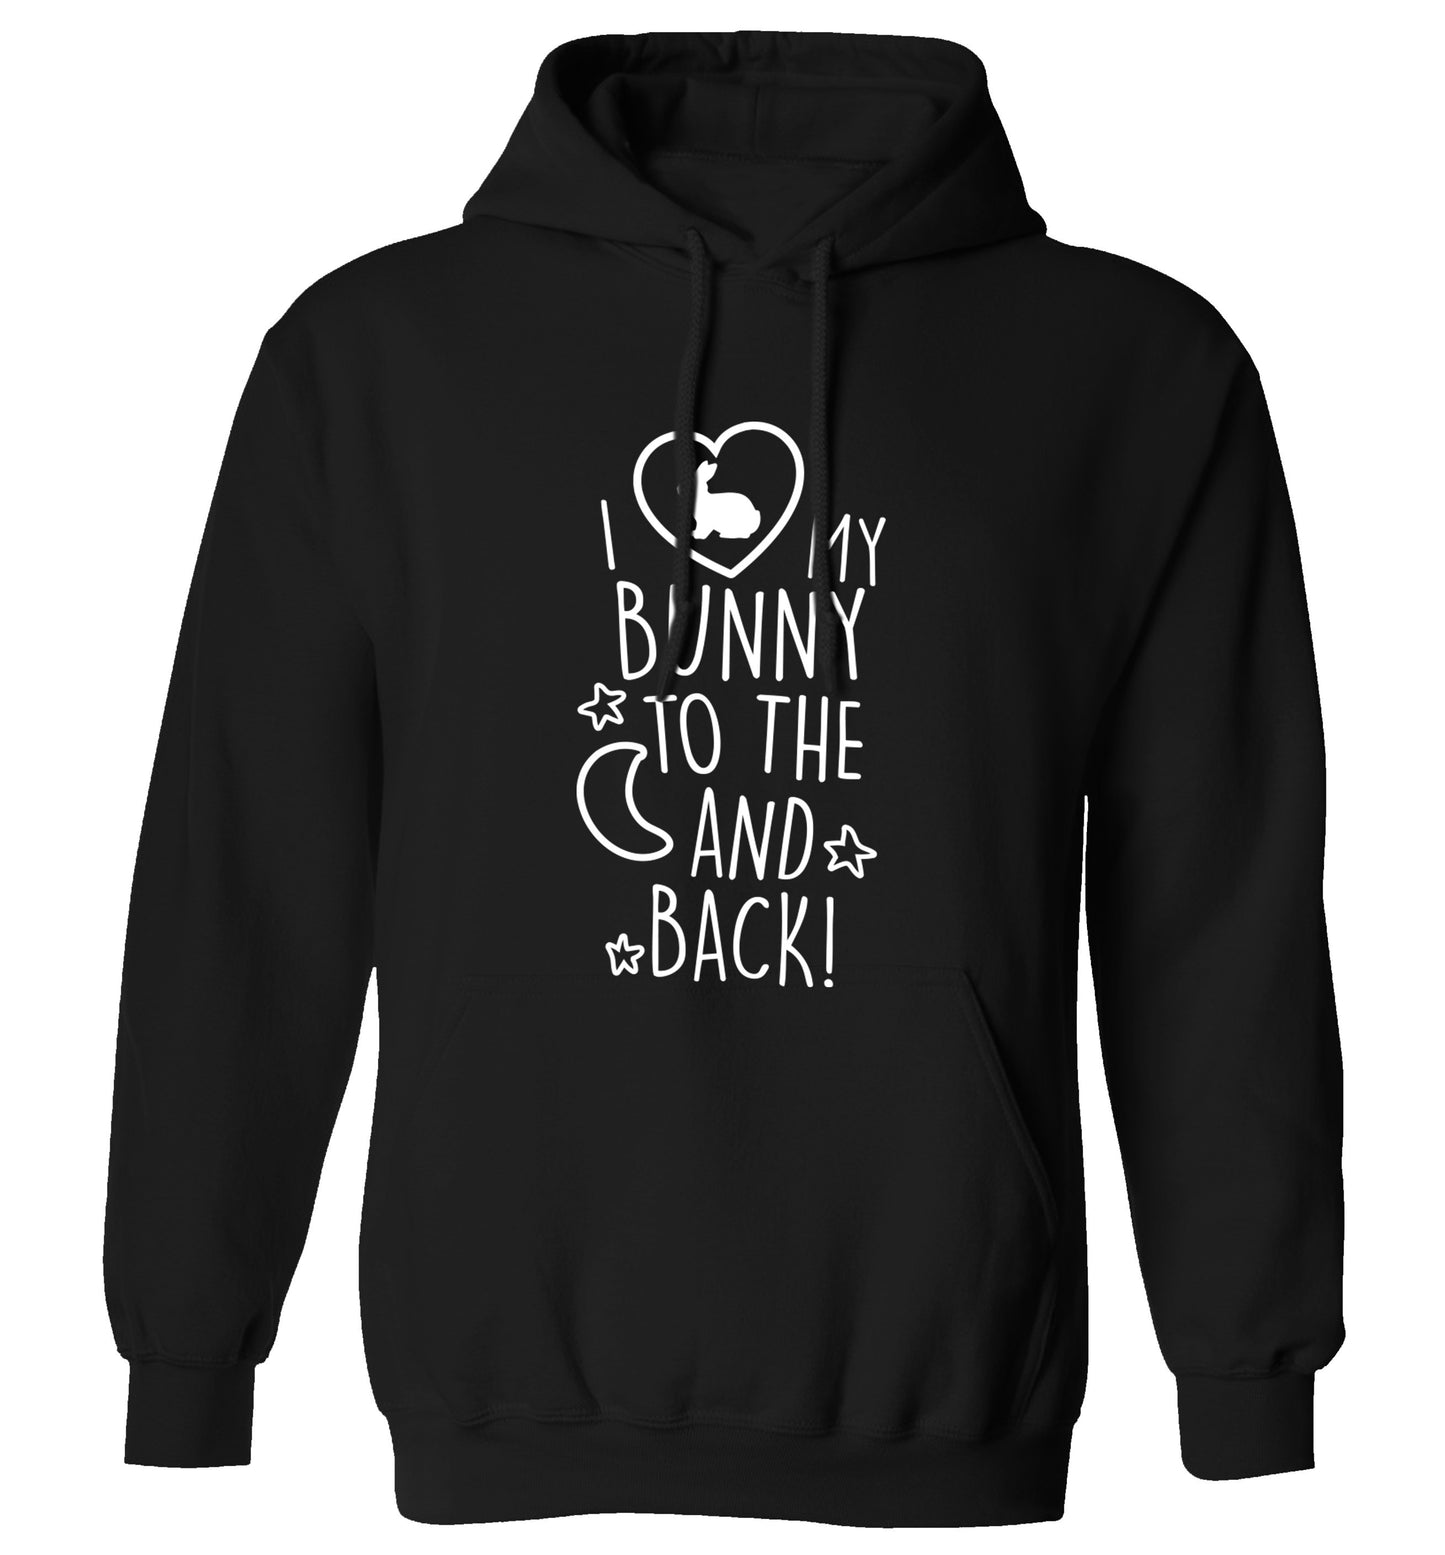 I love my bunny to the moon and back adults unisex black hoodie 2XL